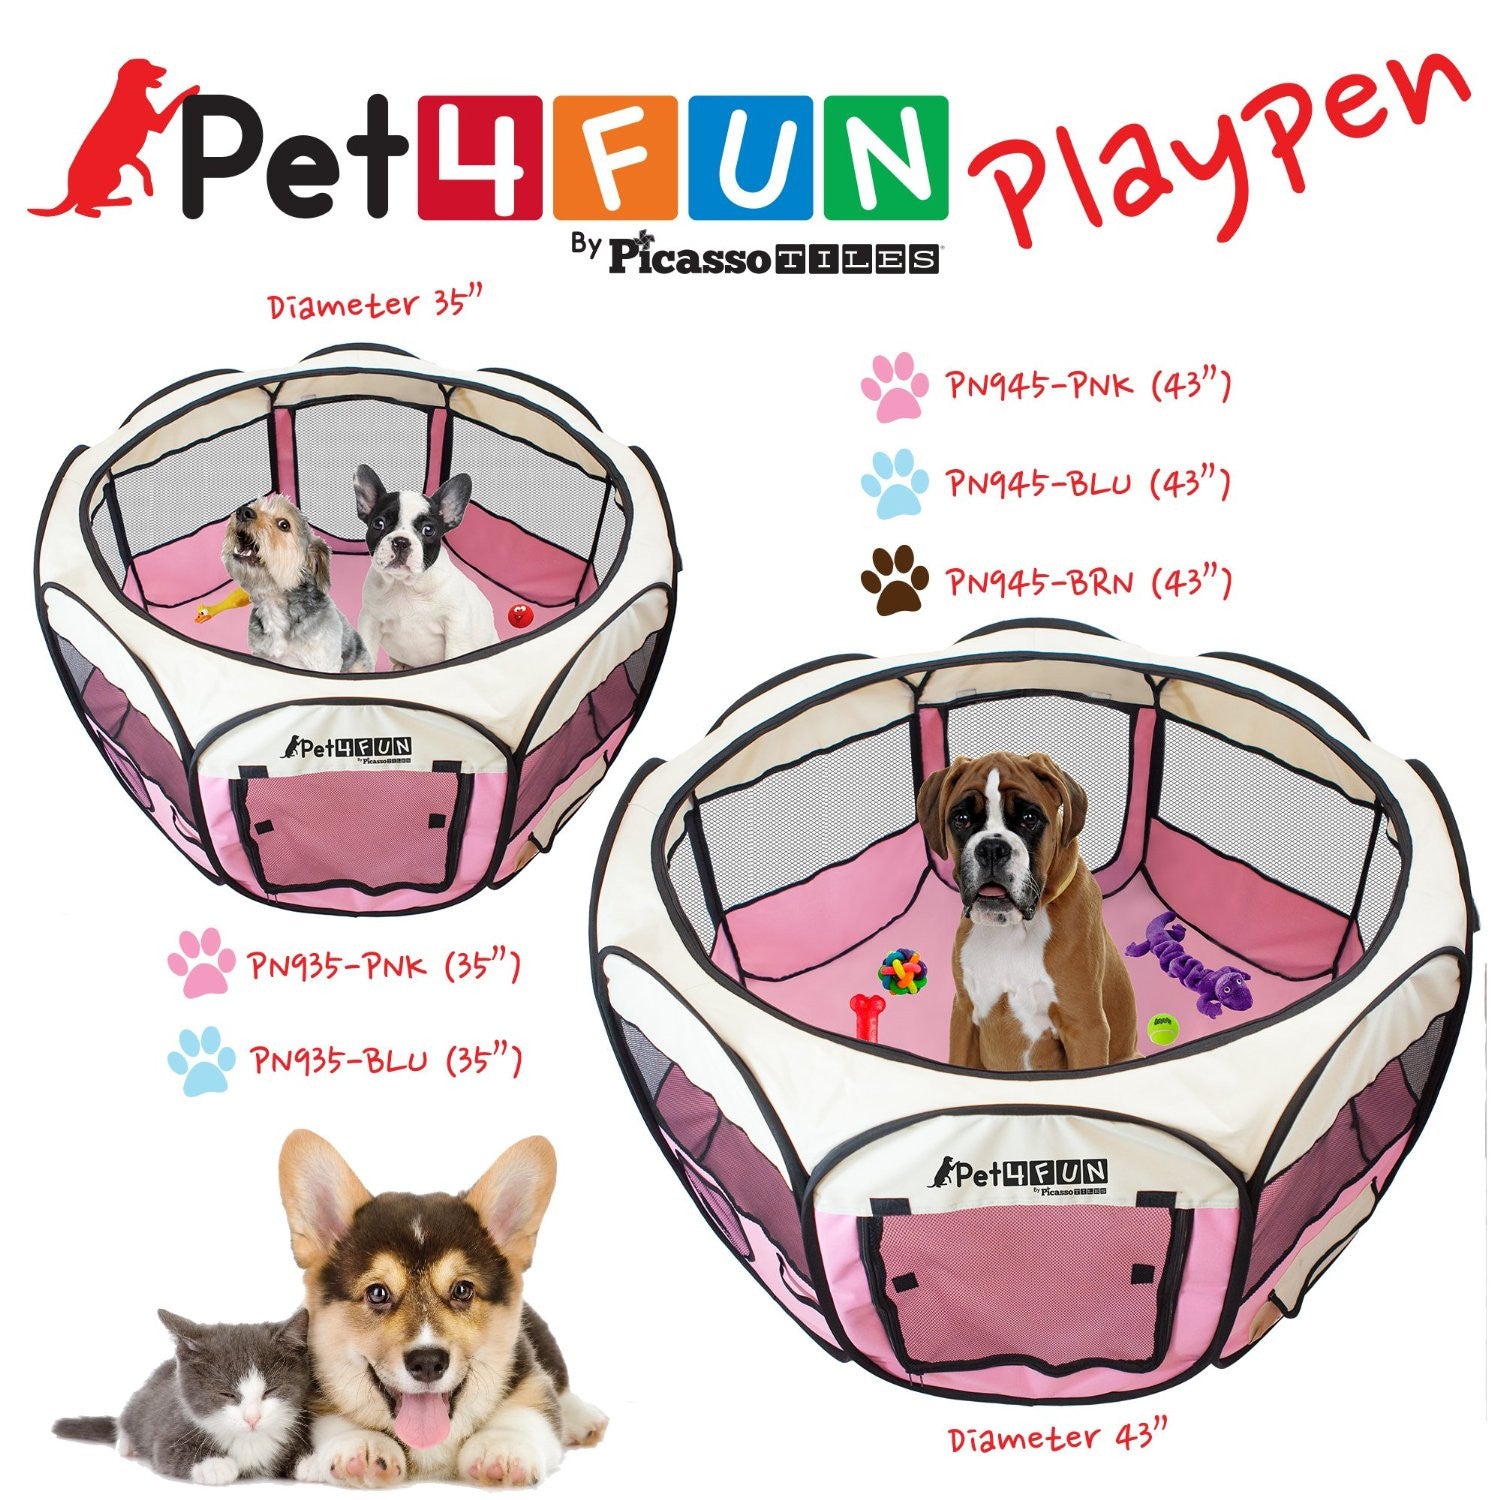 PET4FUN® PN945 Medium 43" Portable Pet Puppy Dog Cat Animal Playpen Yard Crates Kennel w/ Premium 600D Oxford Cloth, Tool-Free Setup, Carry Bag, Removable Security Mesh Cover/Shade, 2 Storage Pockets 